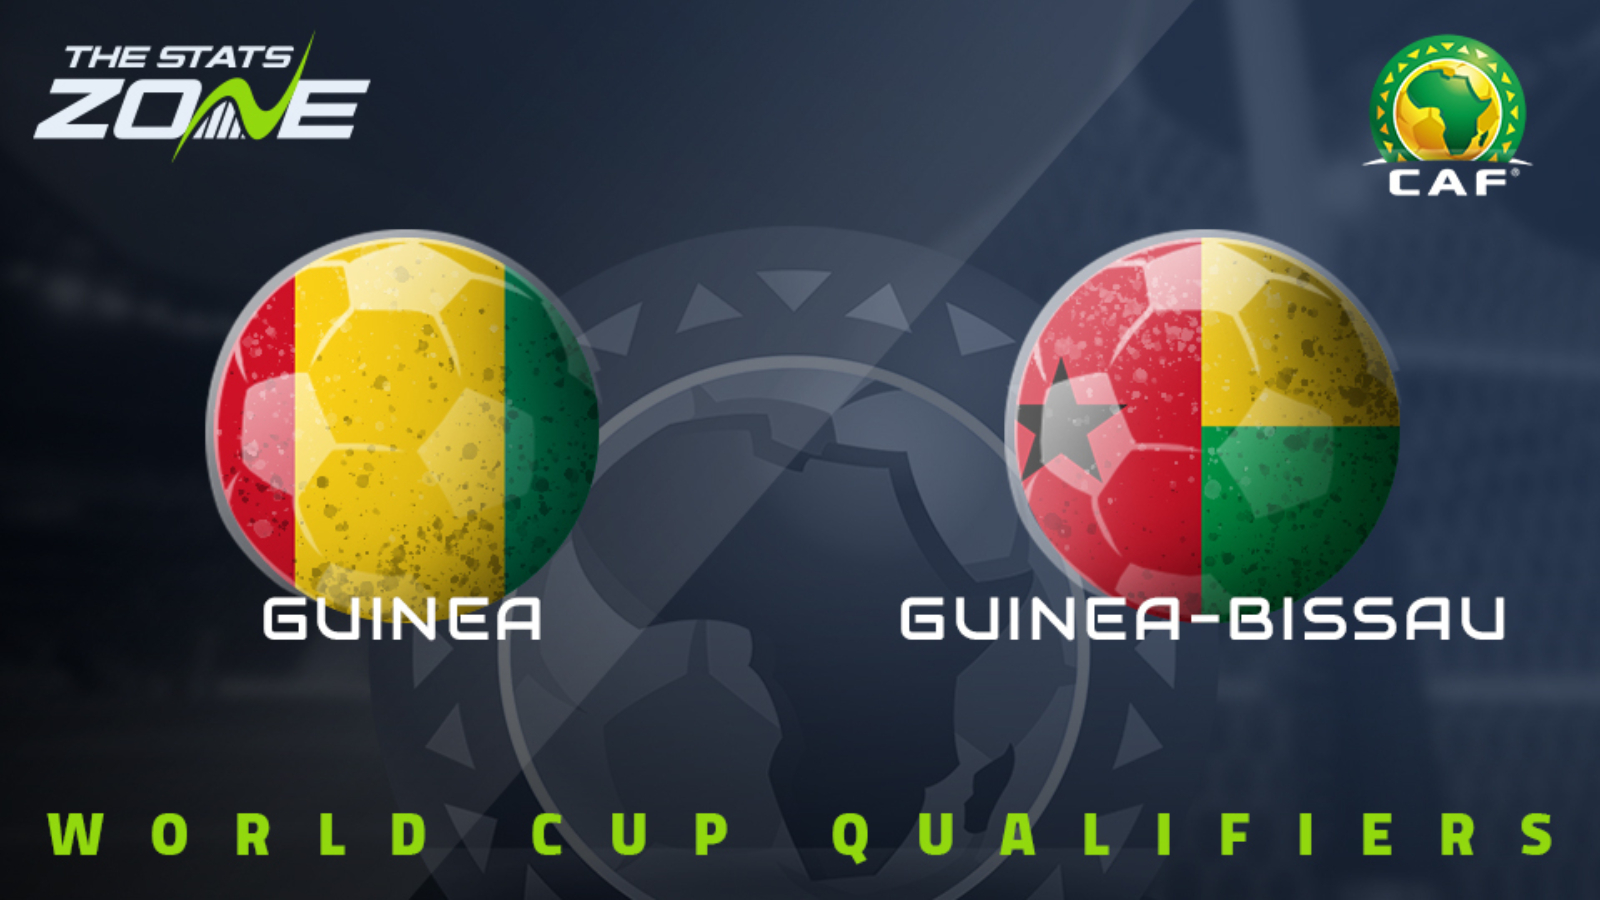 FIFA World Cup 2022 CAF Qualifiers Guinea vs GuineaBissau Preview